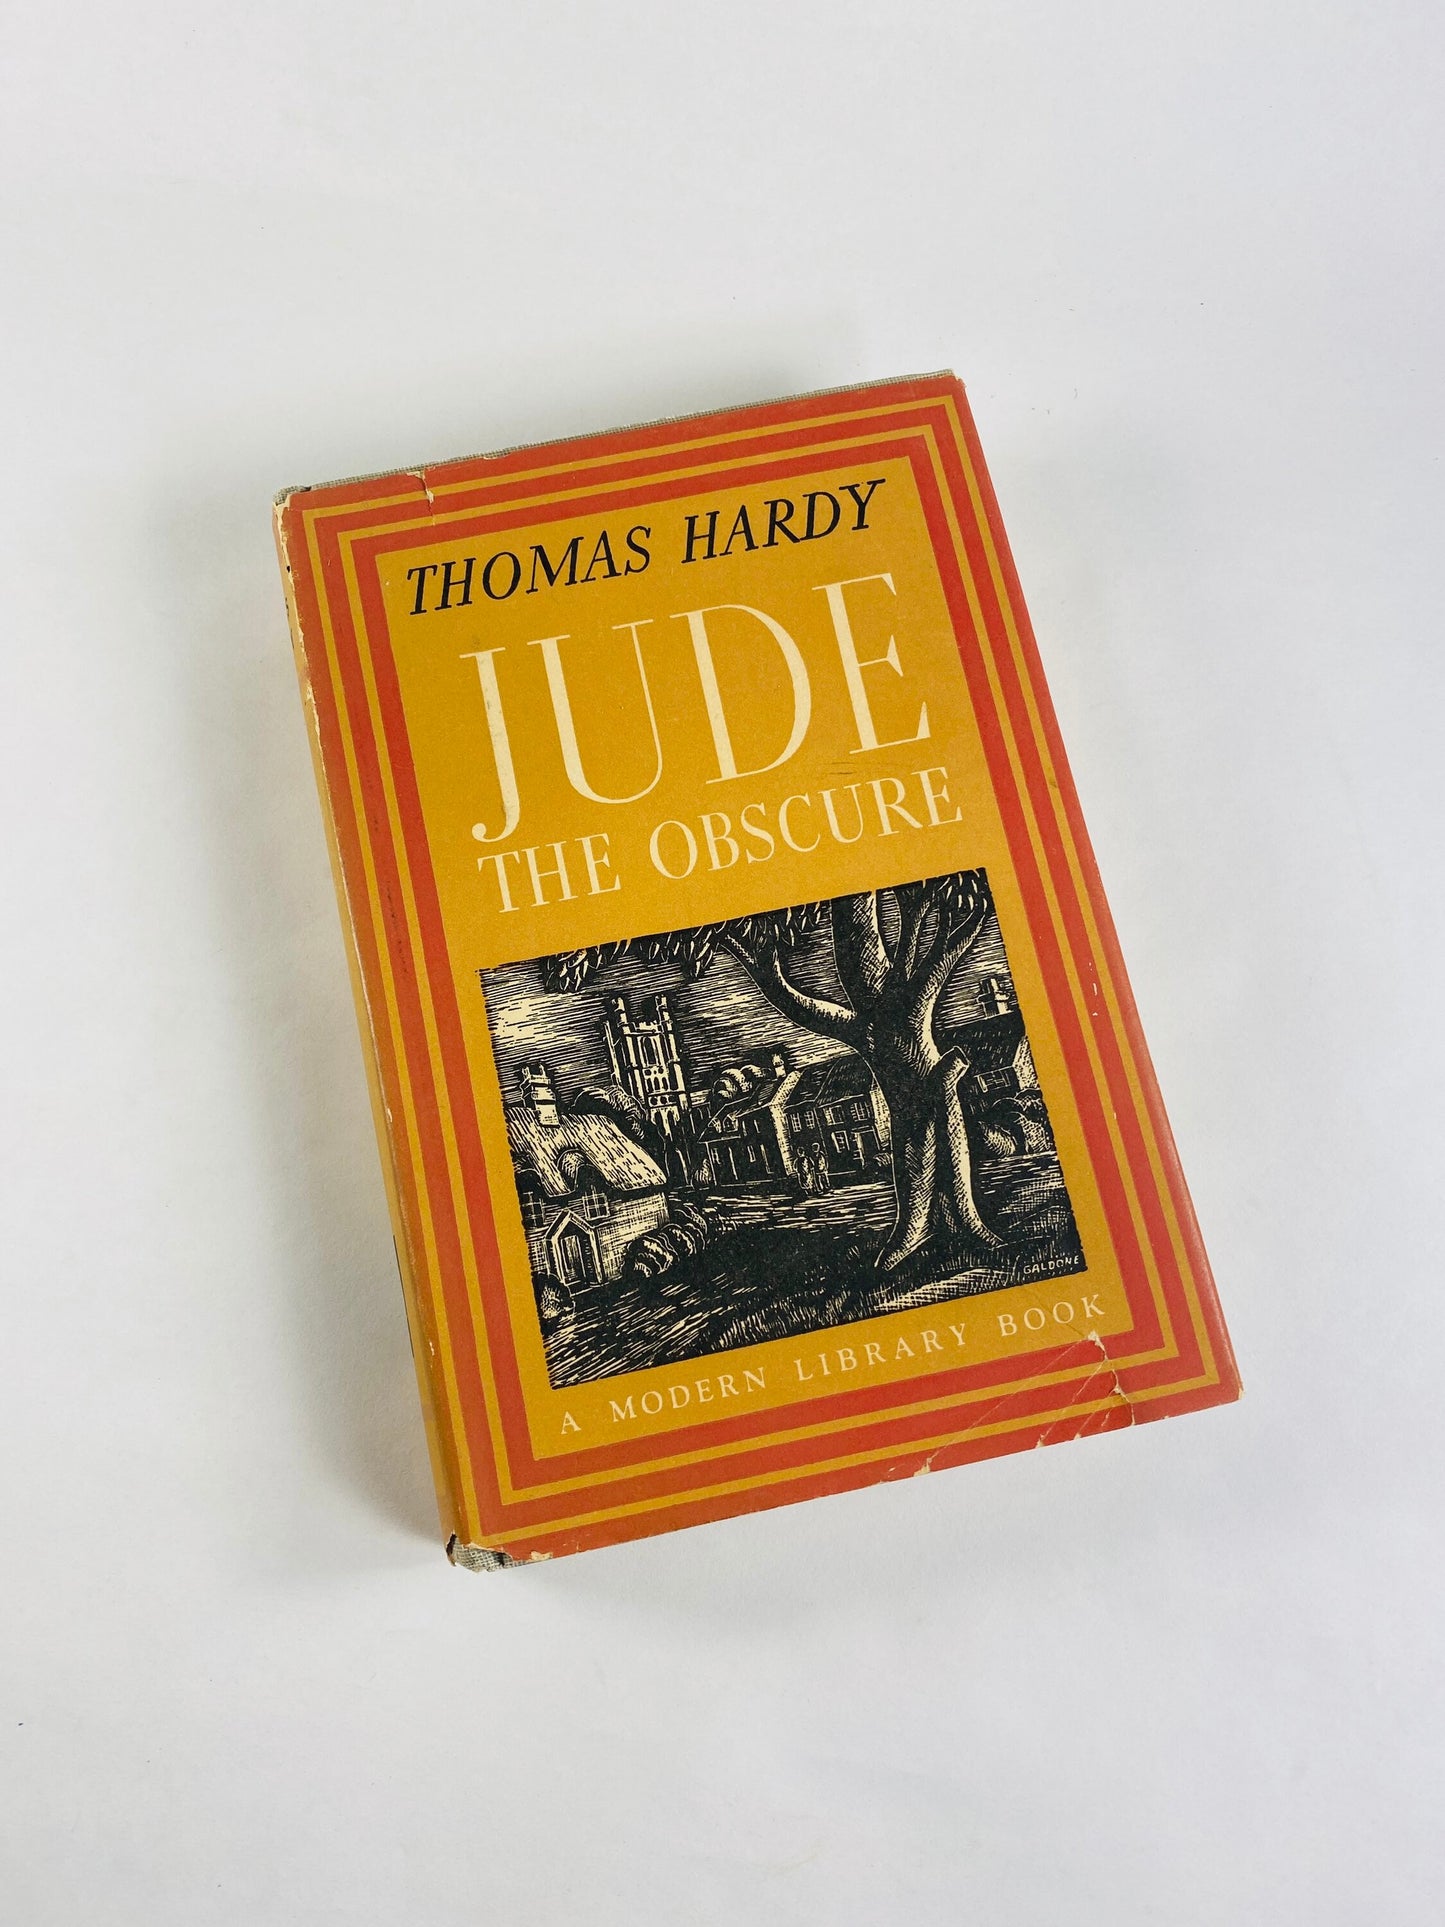 1941 Jude the Obscure by Thomas Hardy Vintage Modern Library book about a man who falls in love with a sensitive, freethinking 'New Woman'.